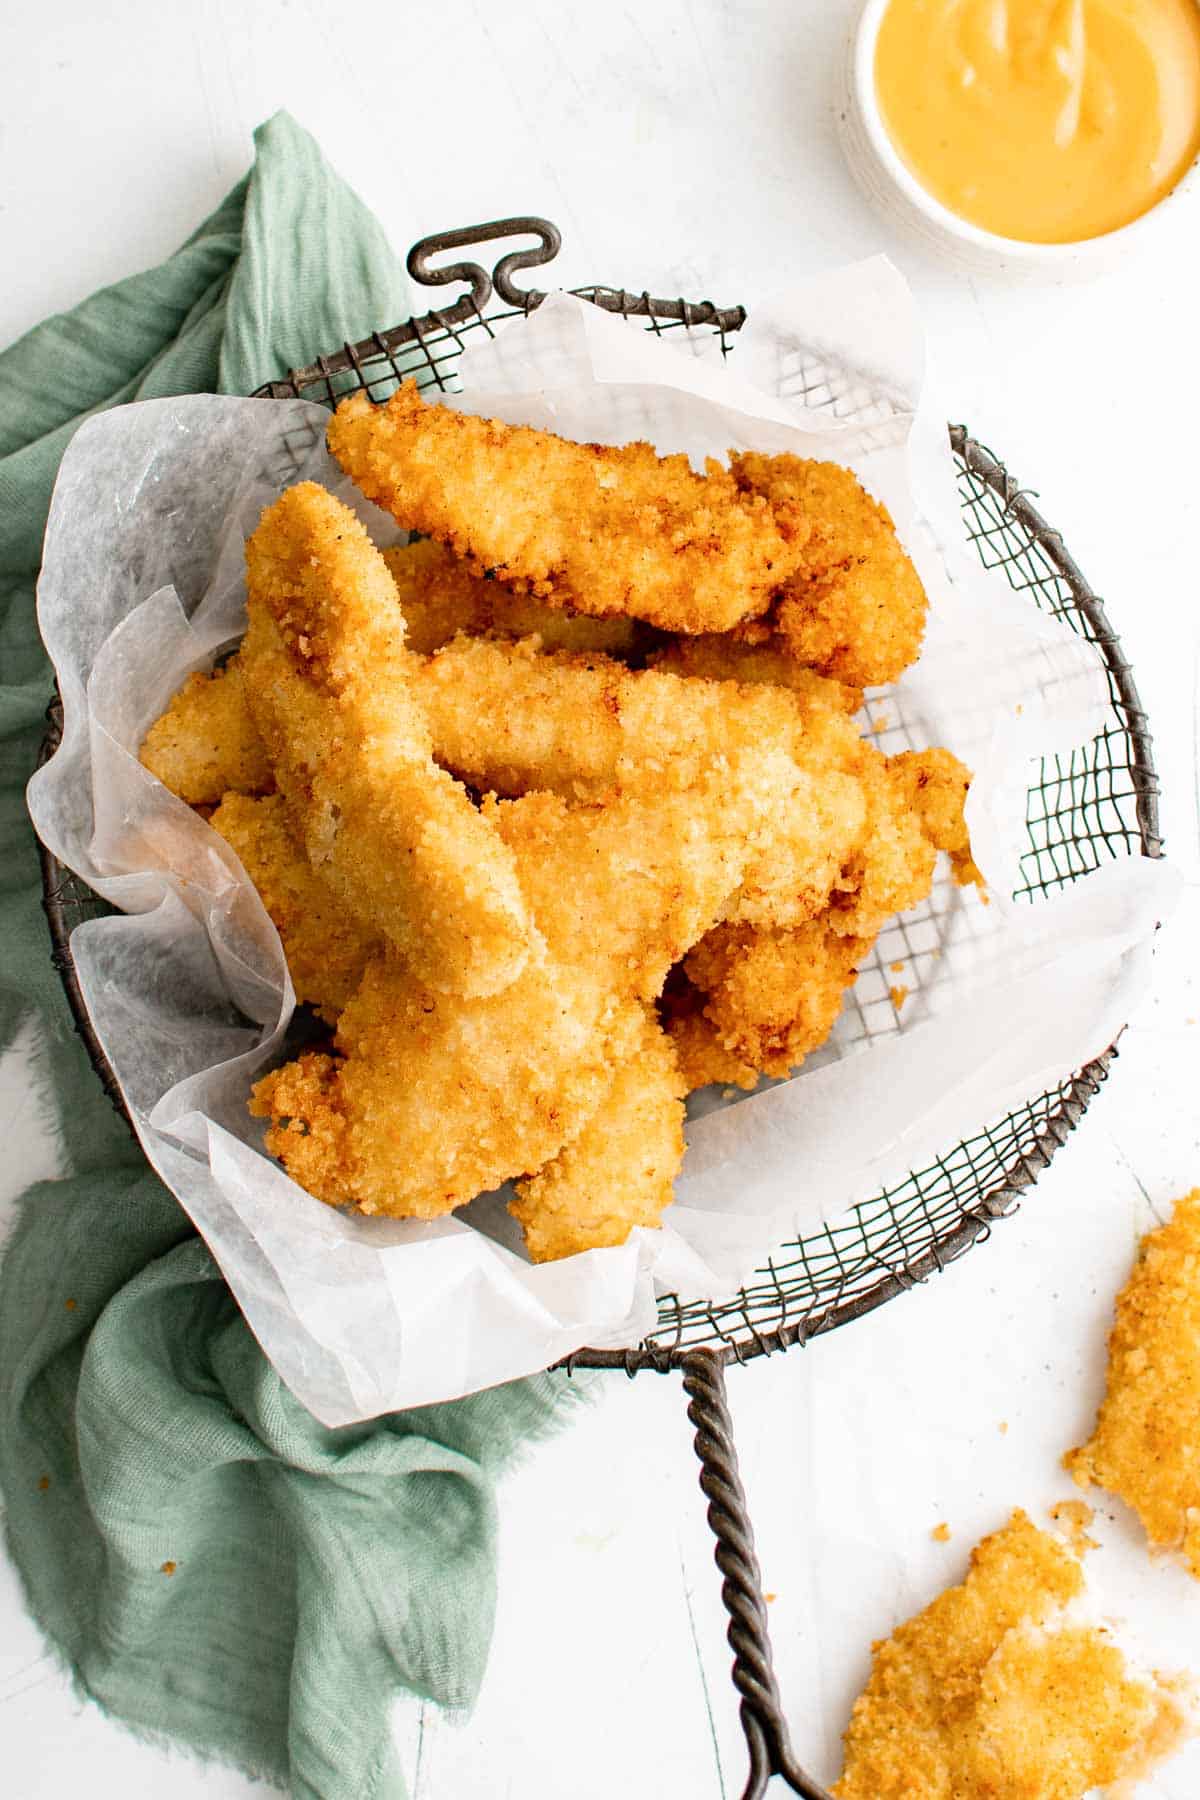 What Is The Minimum Hot-Holding Temperature Requirement For Chicken Strips? 